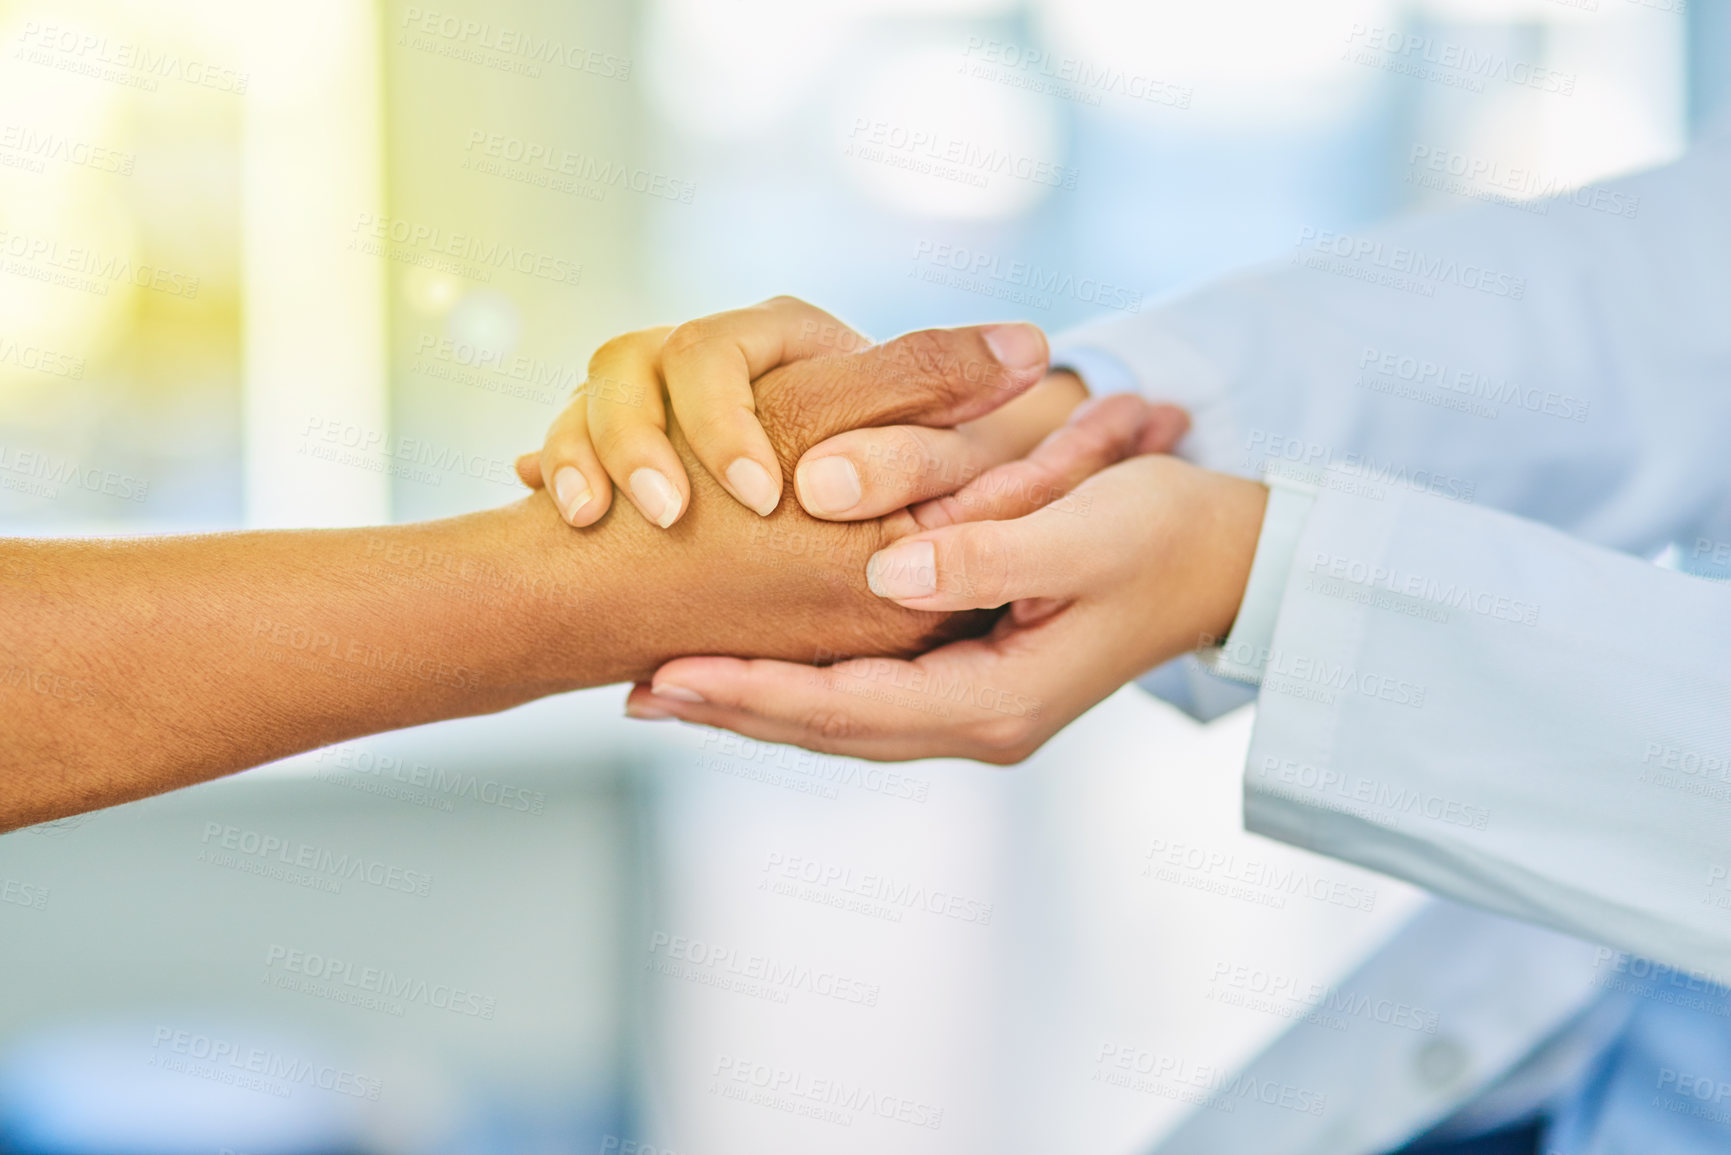 Buy stock photo Closeup shot of an unrecognizable doctor holding a patient's hand in comfort